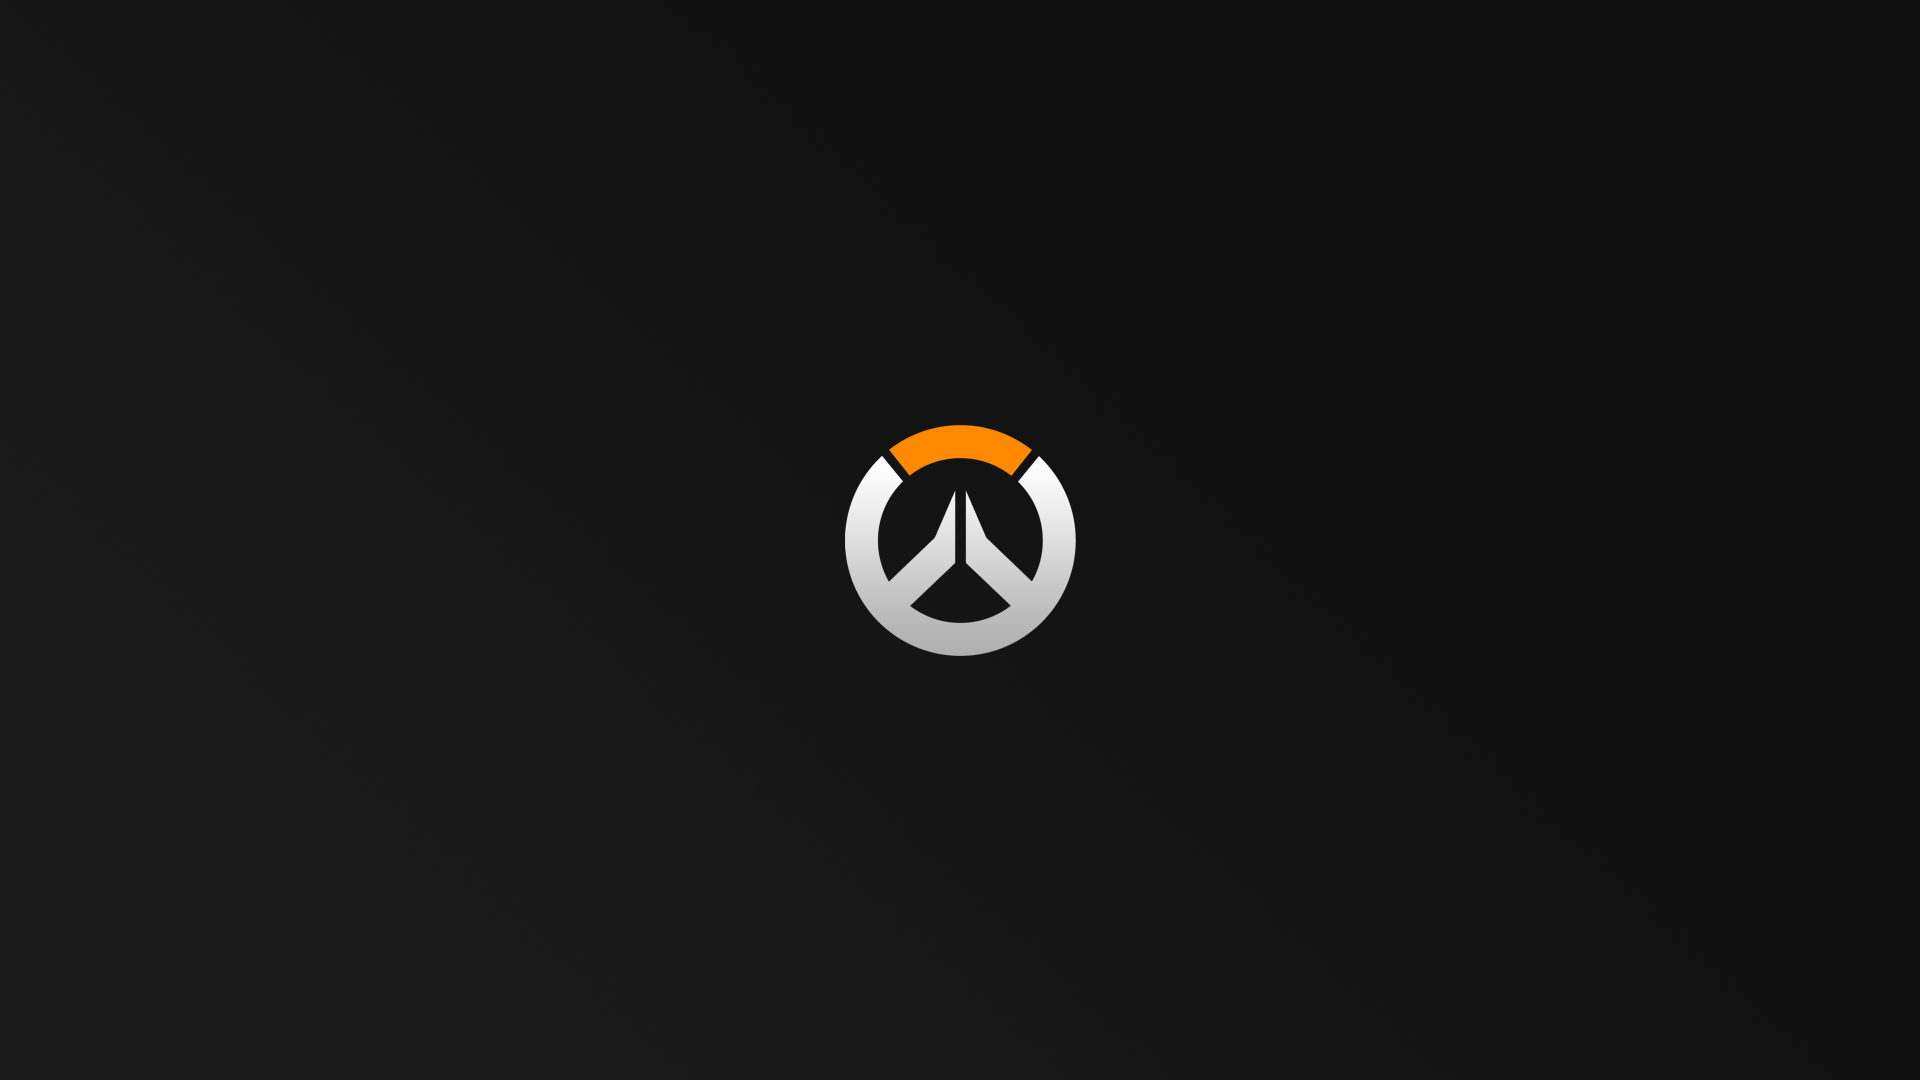 Overwatch Wallpapers High Quality Download Free HD Wallpapers Download Free Images Wallpaper [wallpaper981.blogspot.com]